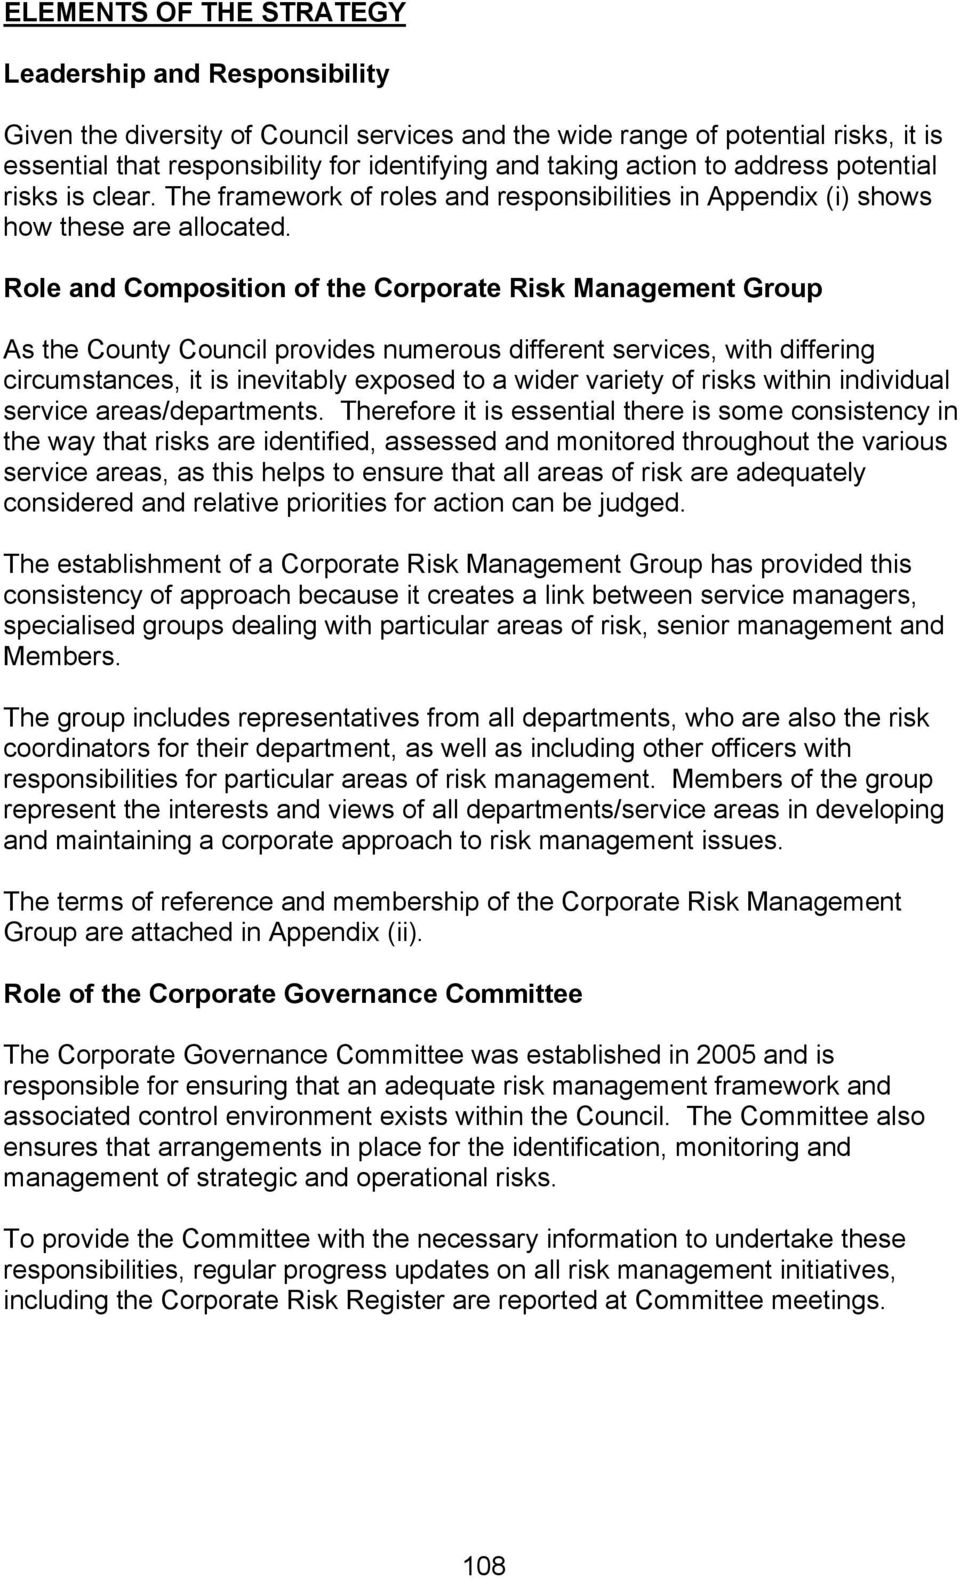 Role and Composition of the Corporate Risk Management Group As the County Council provides numerous different services, with differing circumstances, it is inevitably exposed to a wider variety of